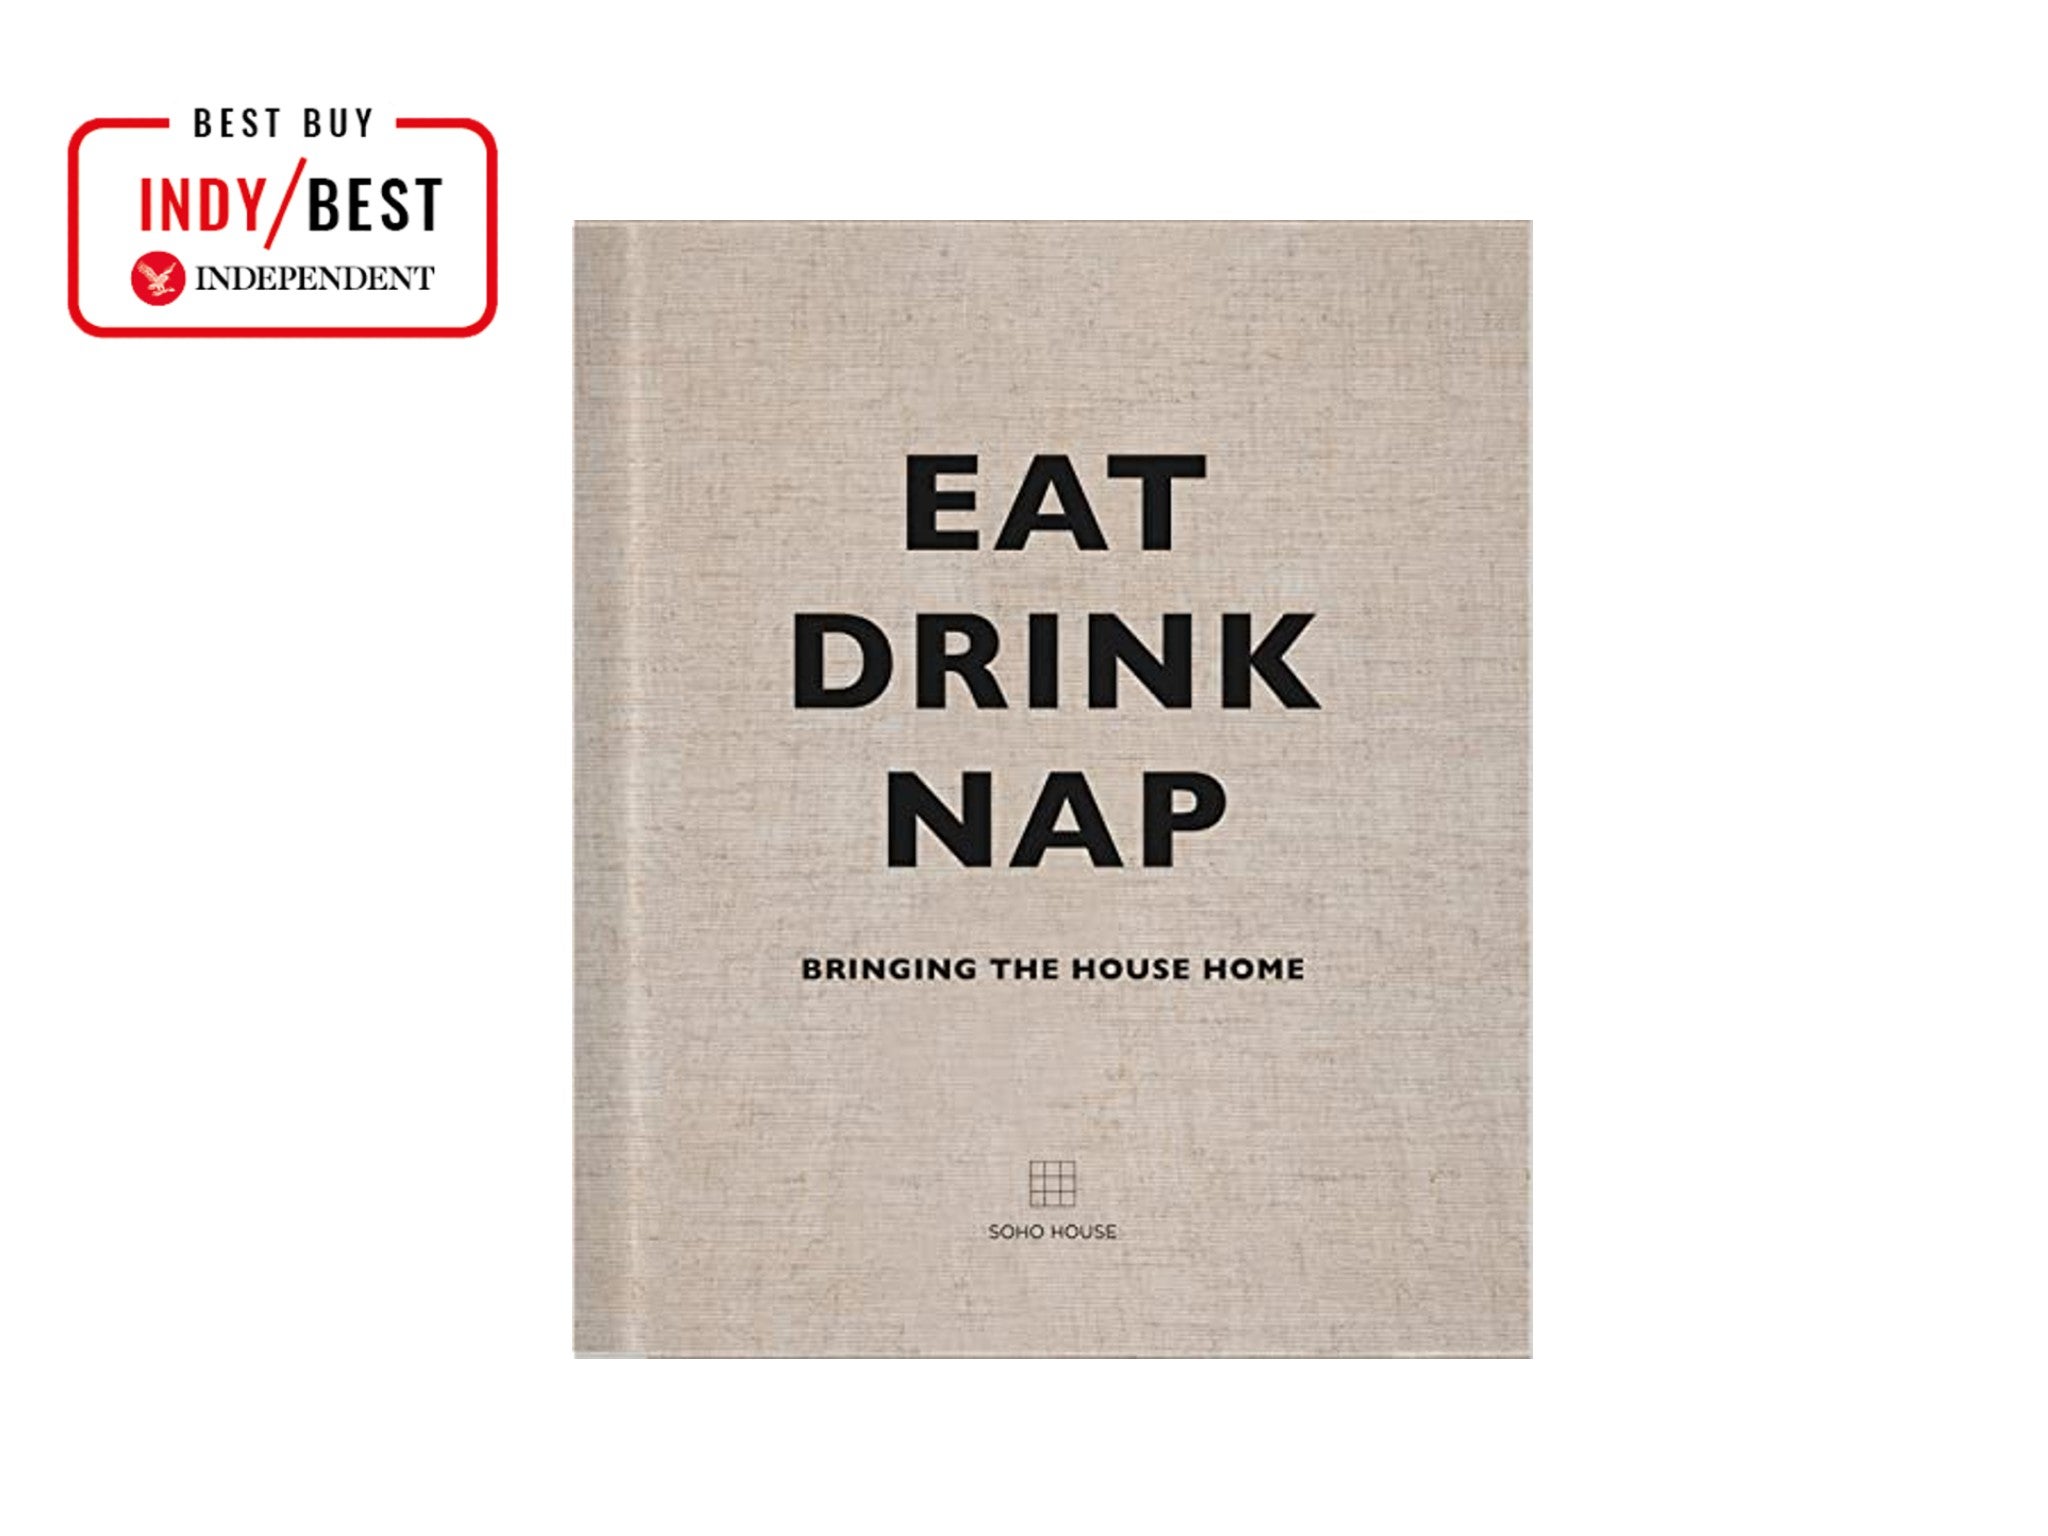 ‘Eat, Drink, Nap’ by Soho Home indybest.jpg